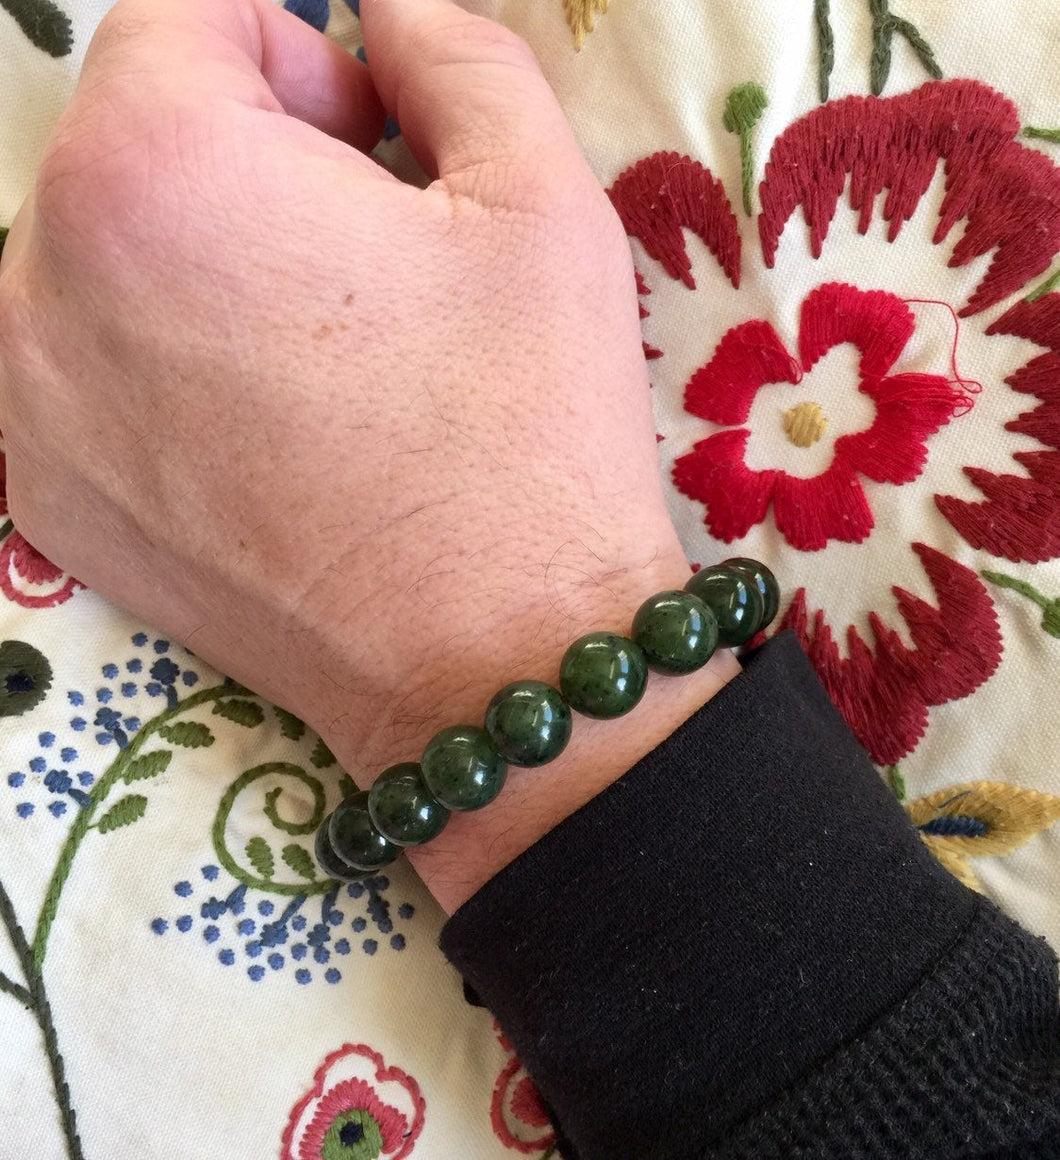 Also my co worker has a permanent jade bracelet that was passed down to her  and she had to grow into it. She has to wear it til it breaks :  r/h3h3productions